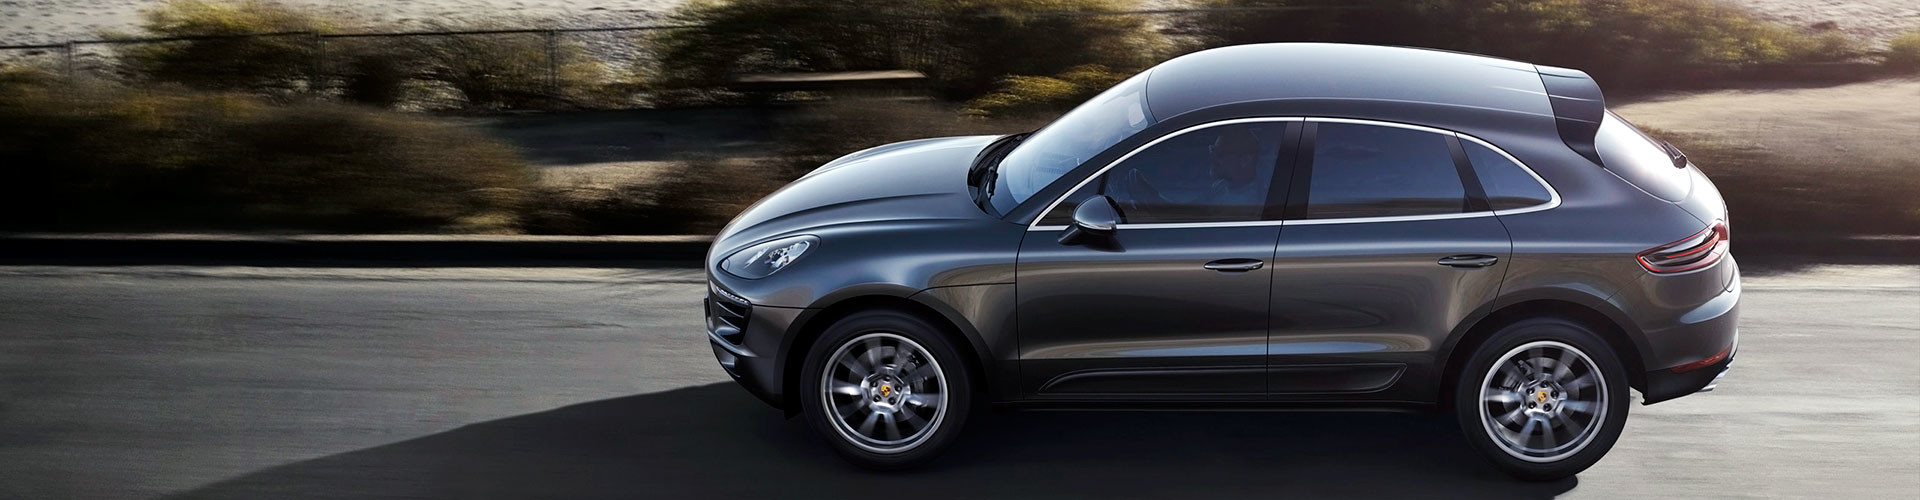 macan buying guide for used Porsche macan suv